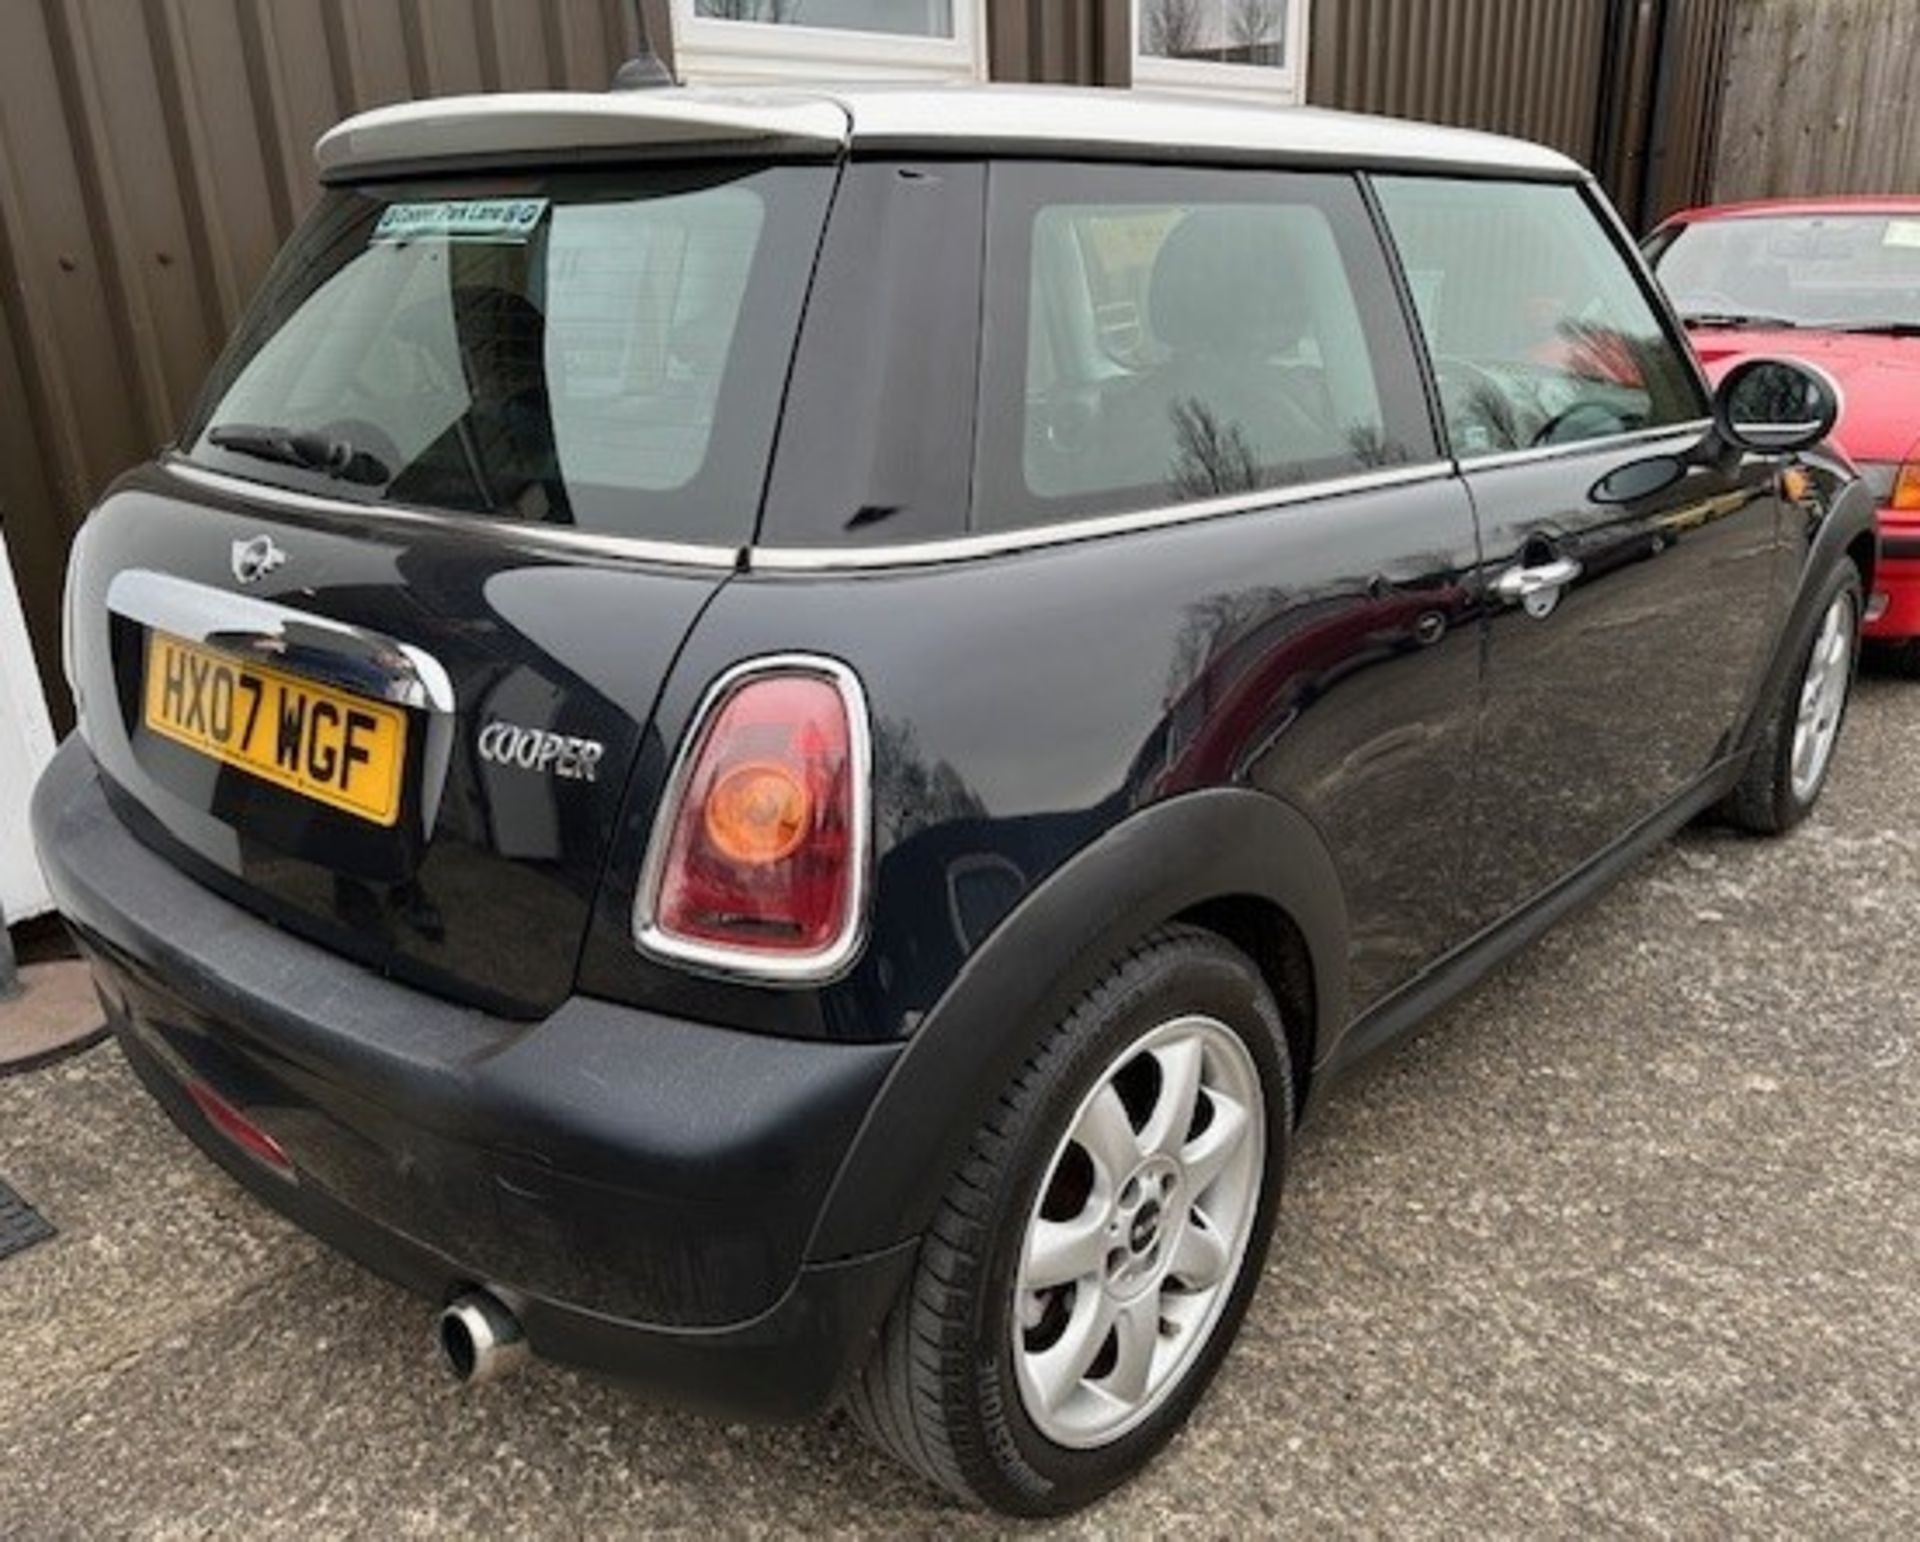 2007 Mini Cooper Registration number HX07 WGF Chassis number WMWMF32000TL66213 Engine number - Image 2 of 7